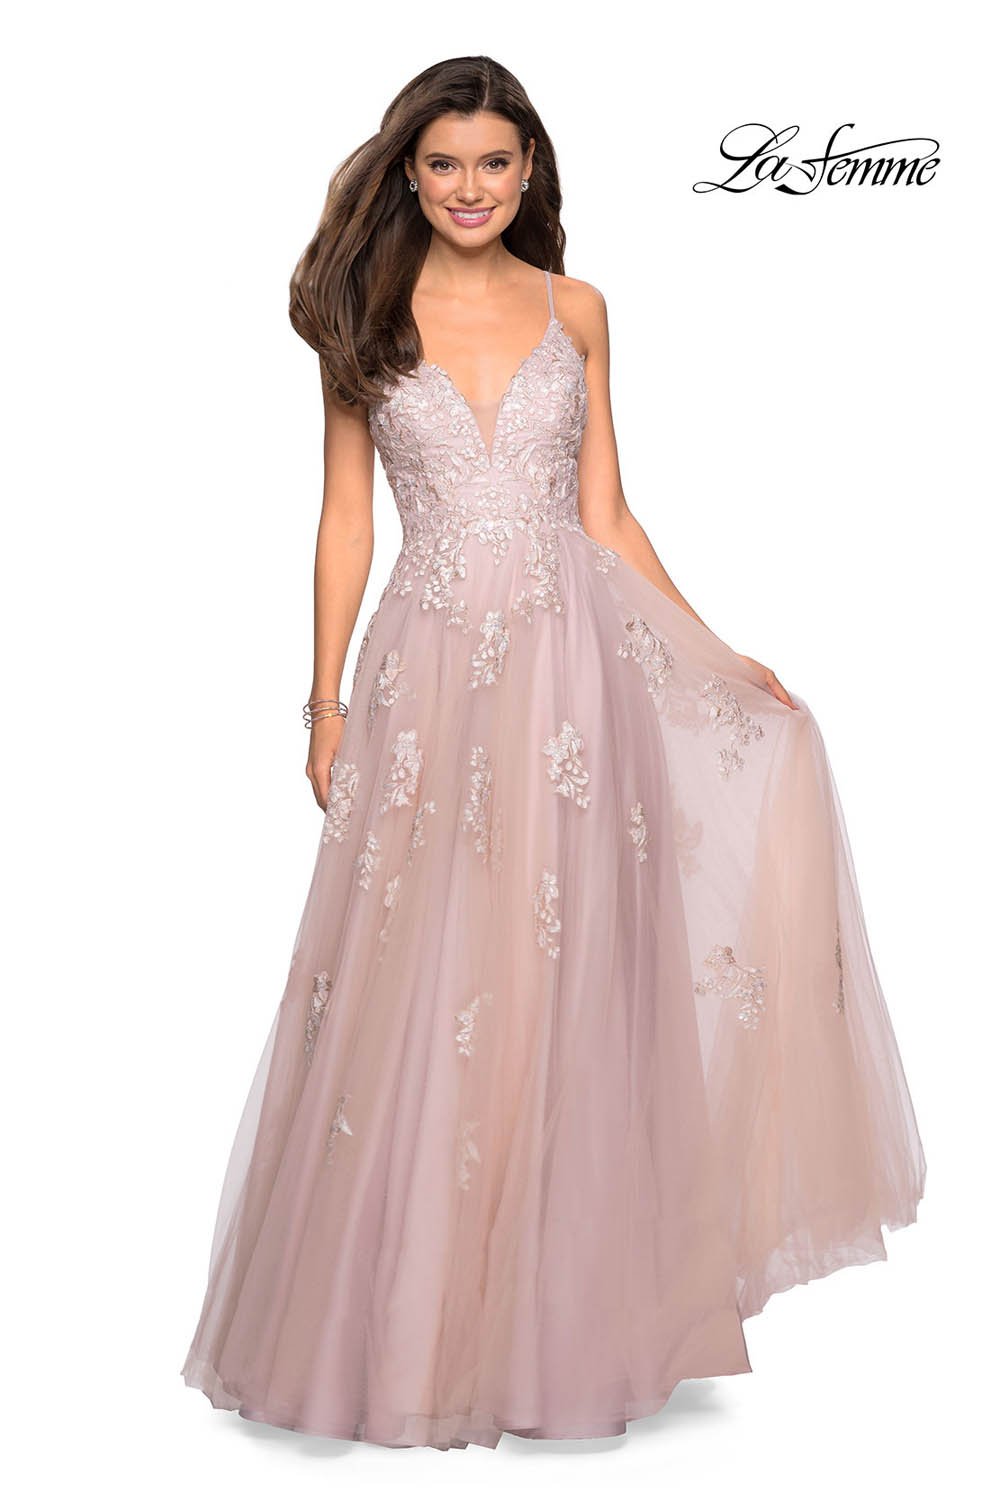 Gigi by La Femme 27320 dress images in these colors: Blush, Cloud Blue, Ivory Nude.